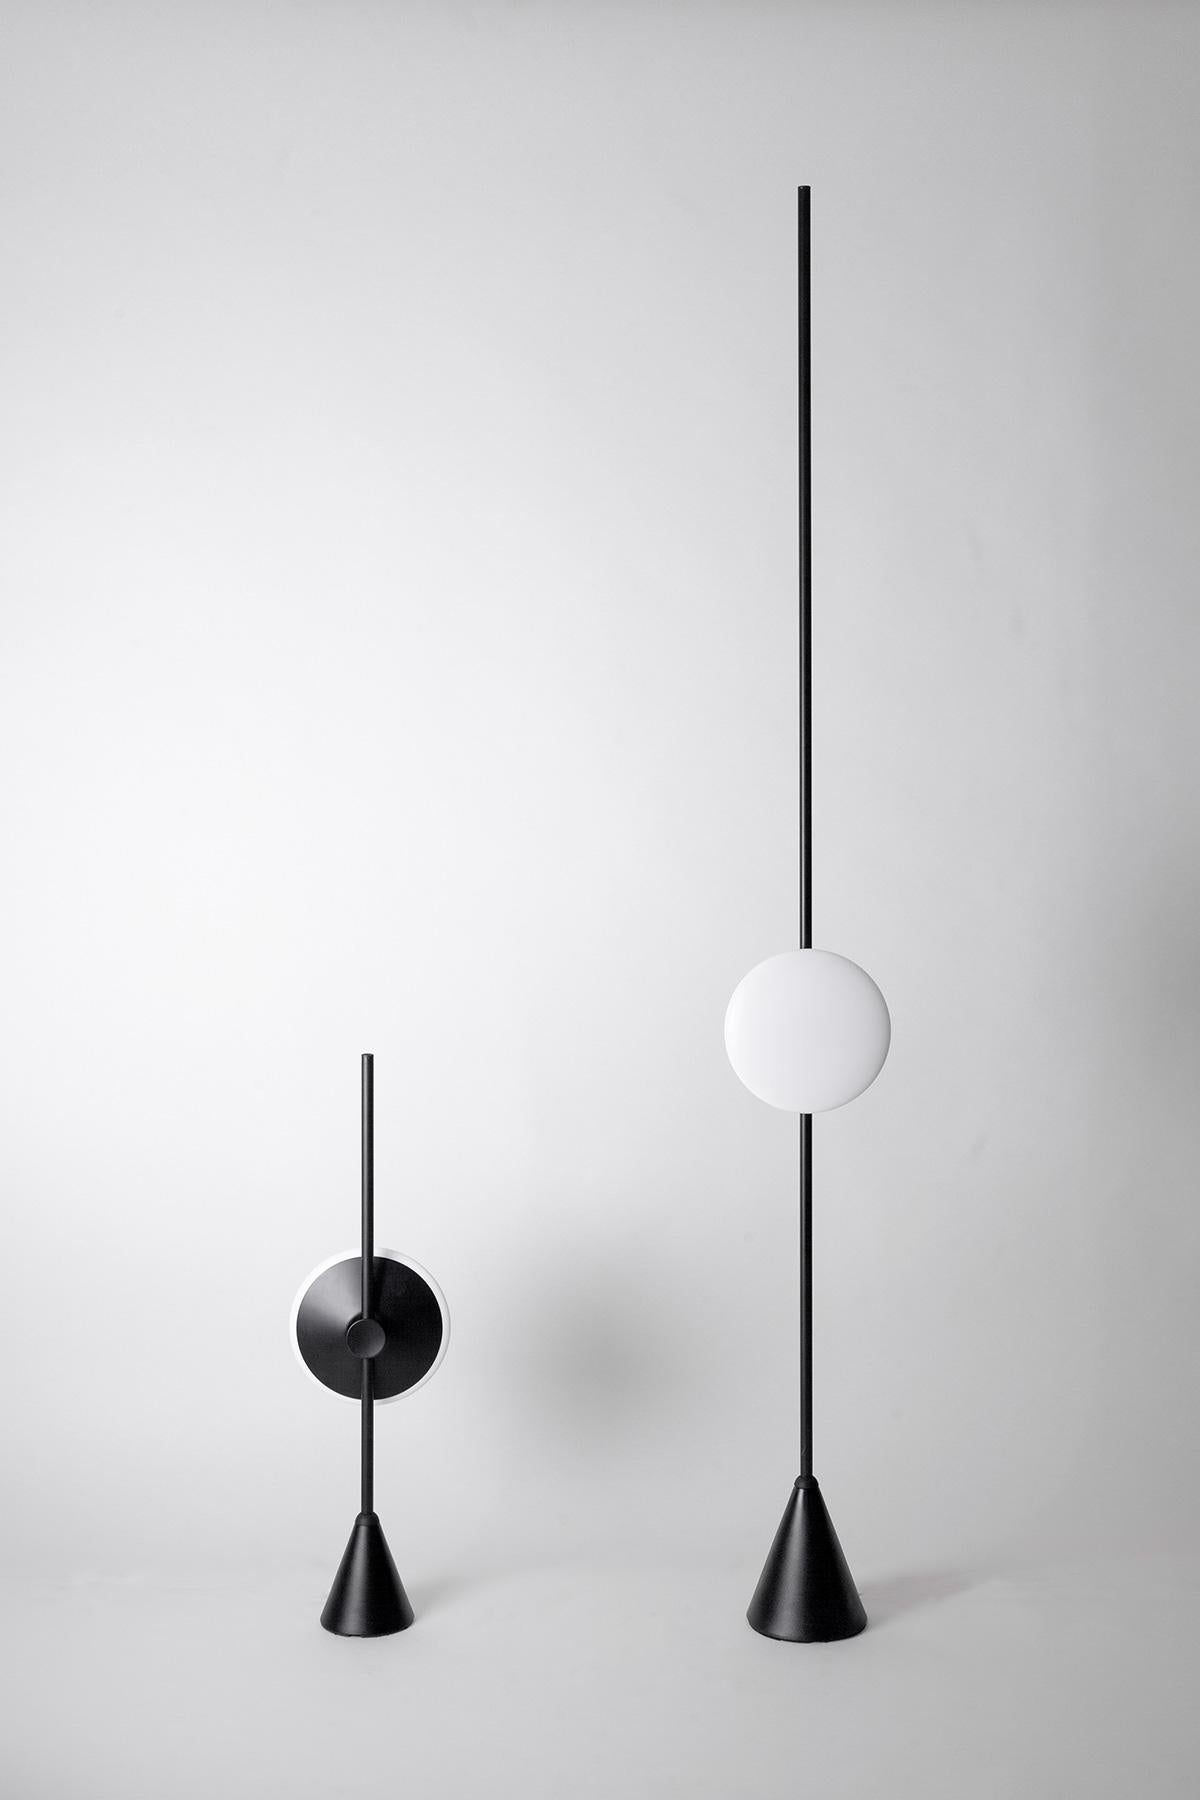 Dawn to dusk floor lamp - Haberdashery 

Measures: W 210 x H 1820 x D 160mm

Material: 

Puck head: 
Aluminium
White polycarbonate
Material Base:
Aluminium with cast iron
Finishes:
Black anodised aluminium

The Dawn to Dusk range